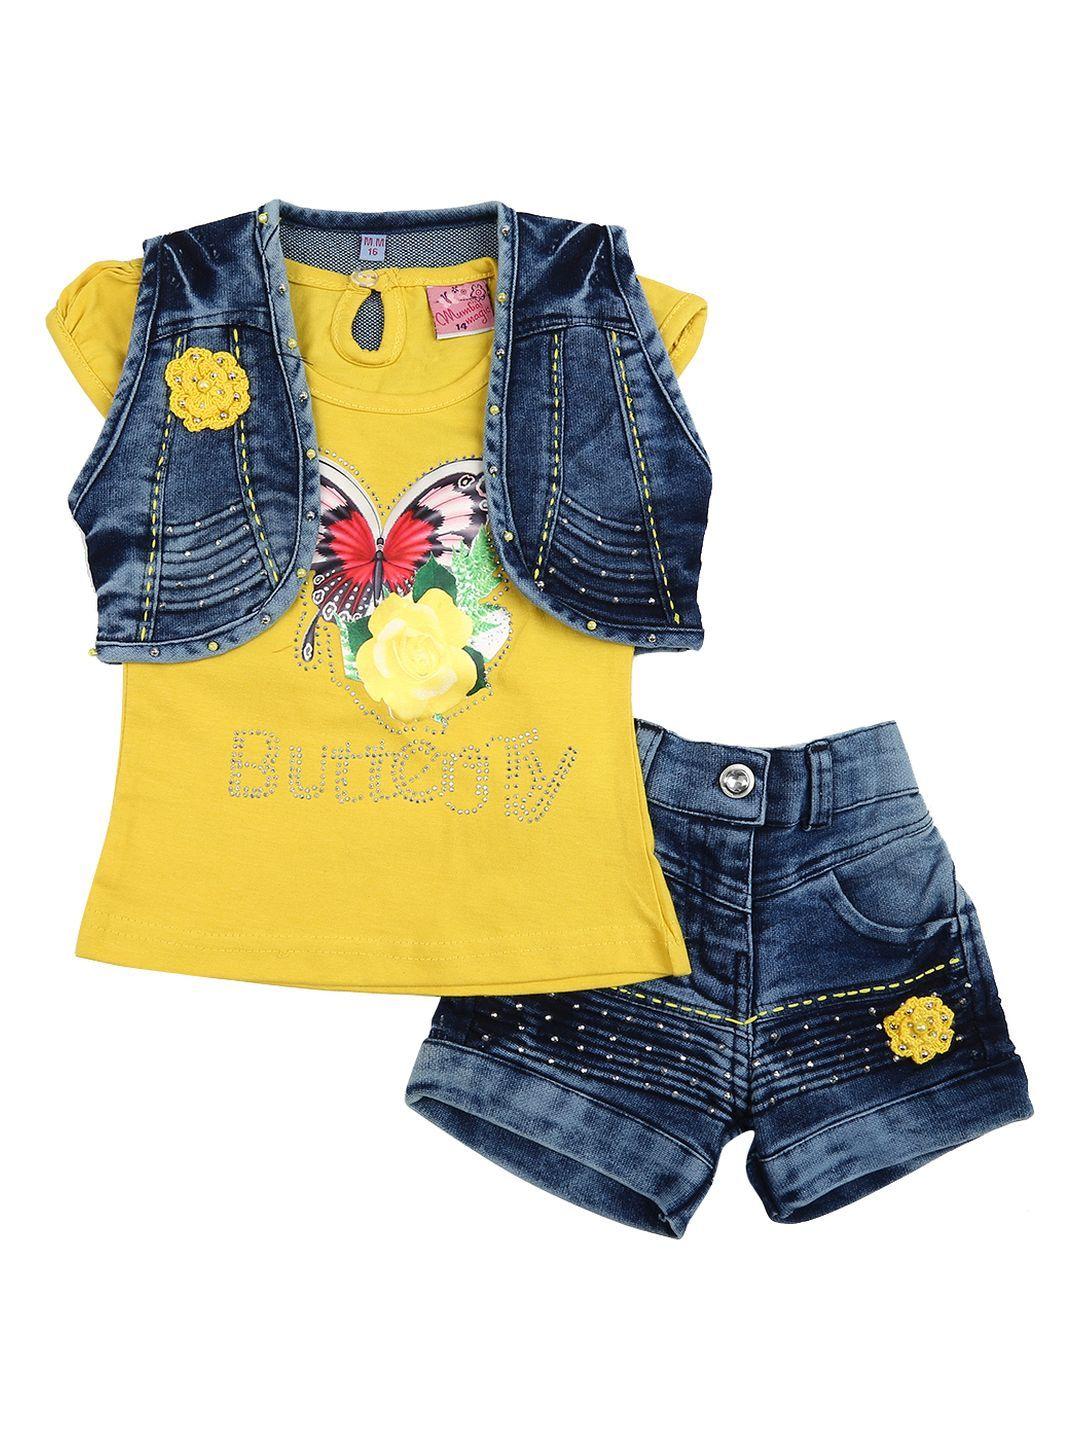 v-mart-unisex-kids-yellow-&-navy-blue-printed-t-shirt-with-shorts